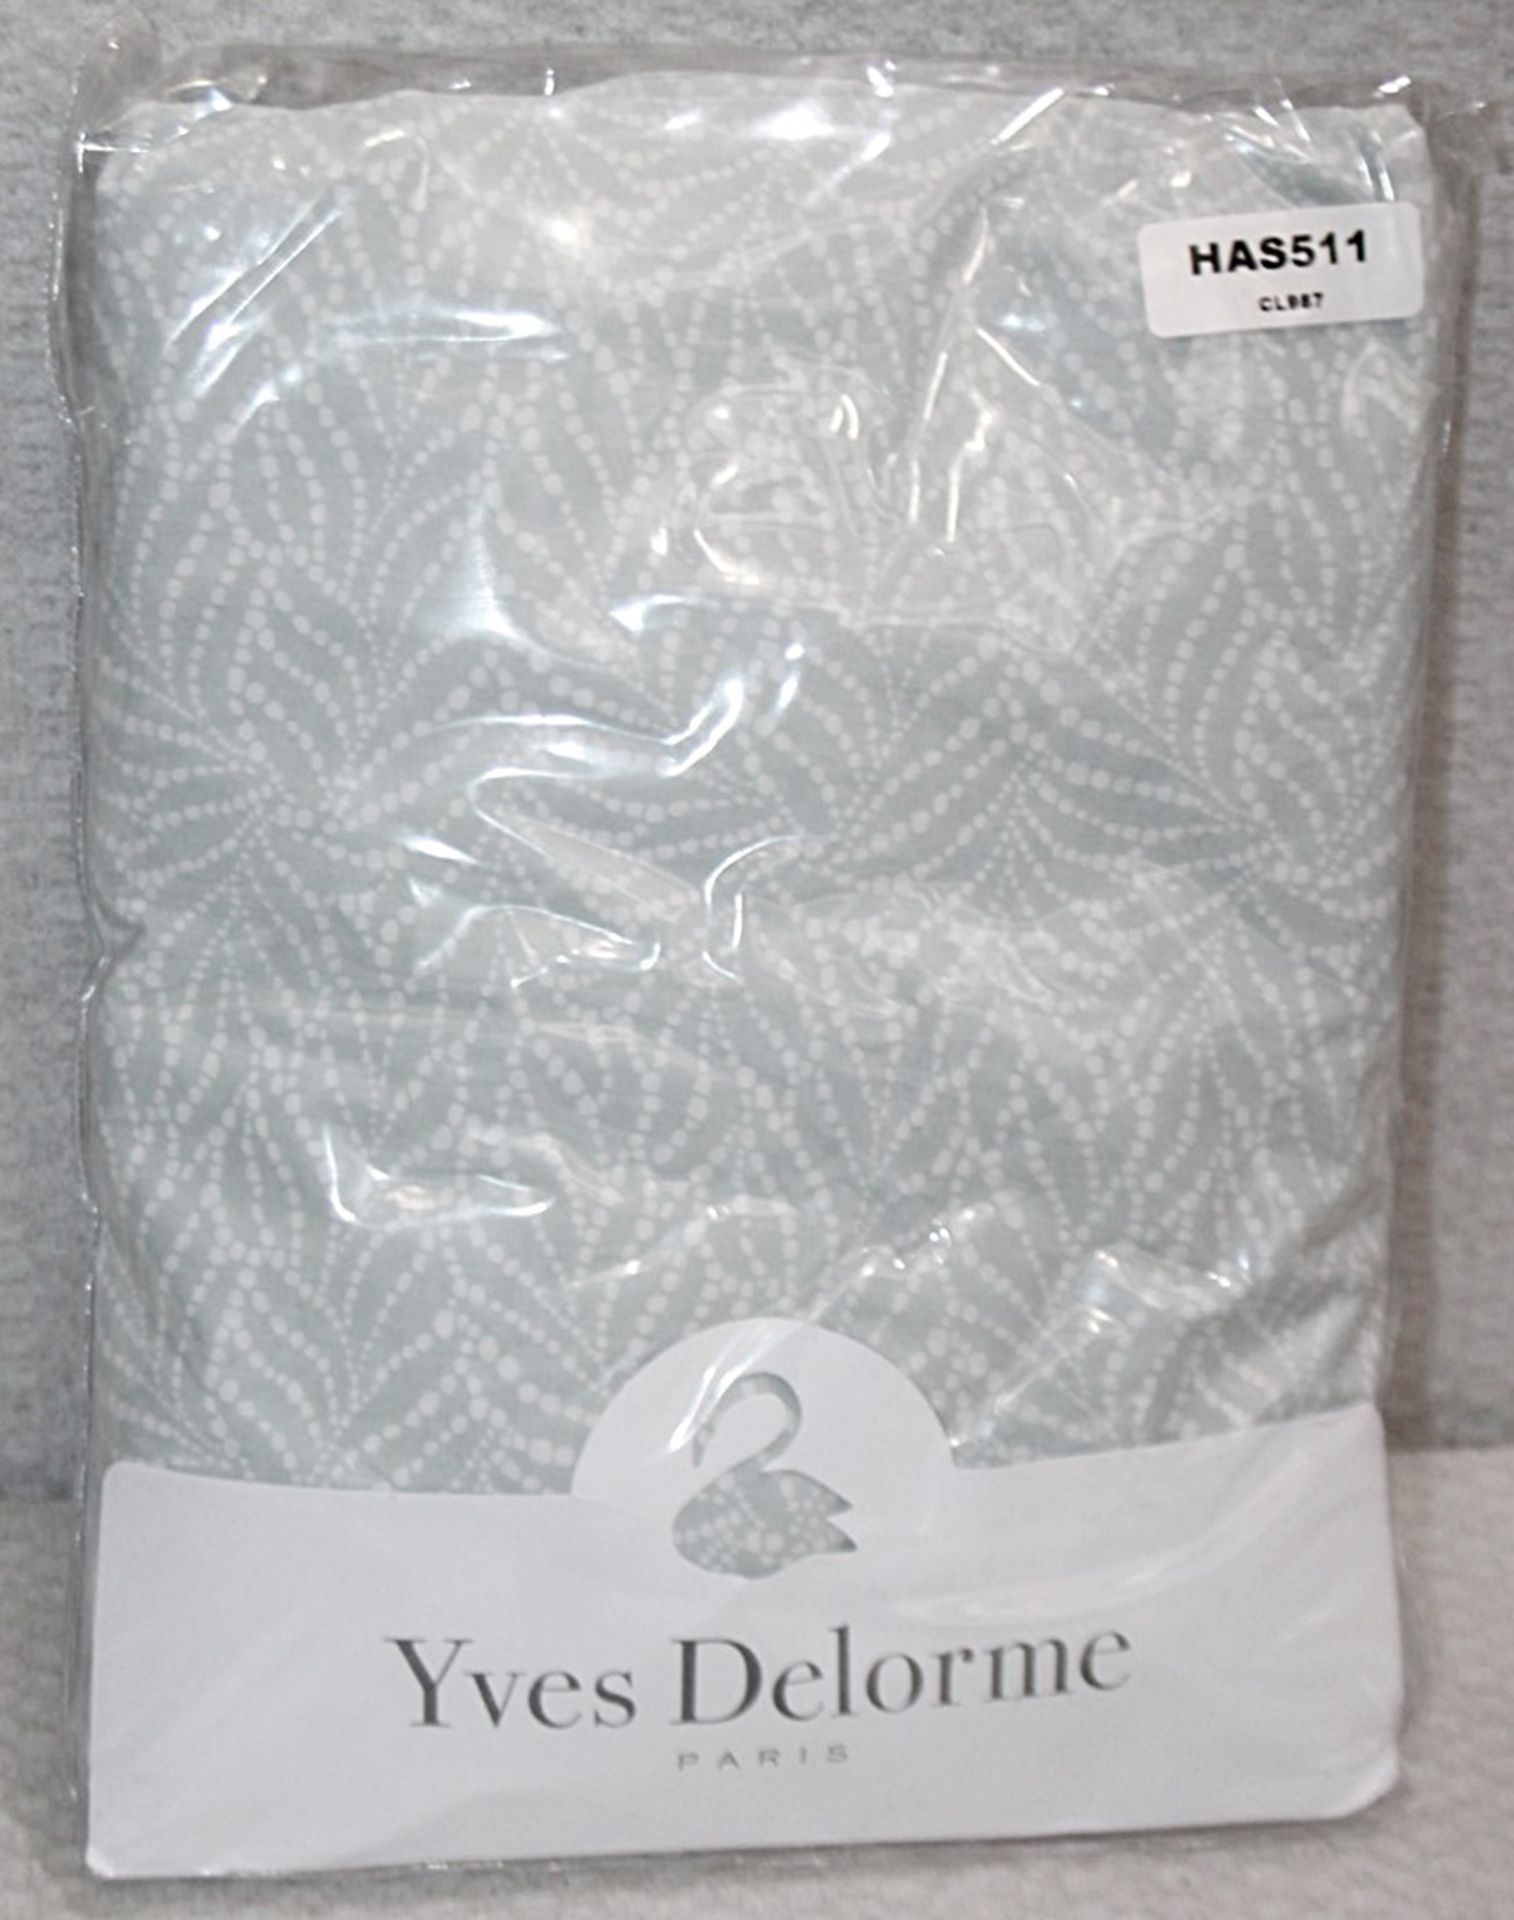 1 x YVES DELORME 'Caliopee' Single 100% Cotton Fitted Sheet (90cm x 190cm) - Unused Stock - Image 4 of 5